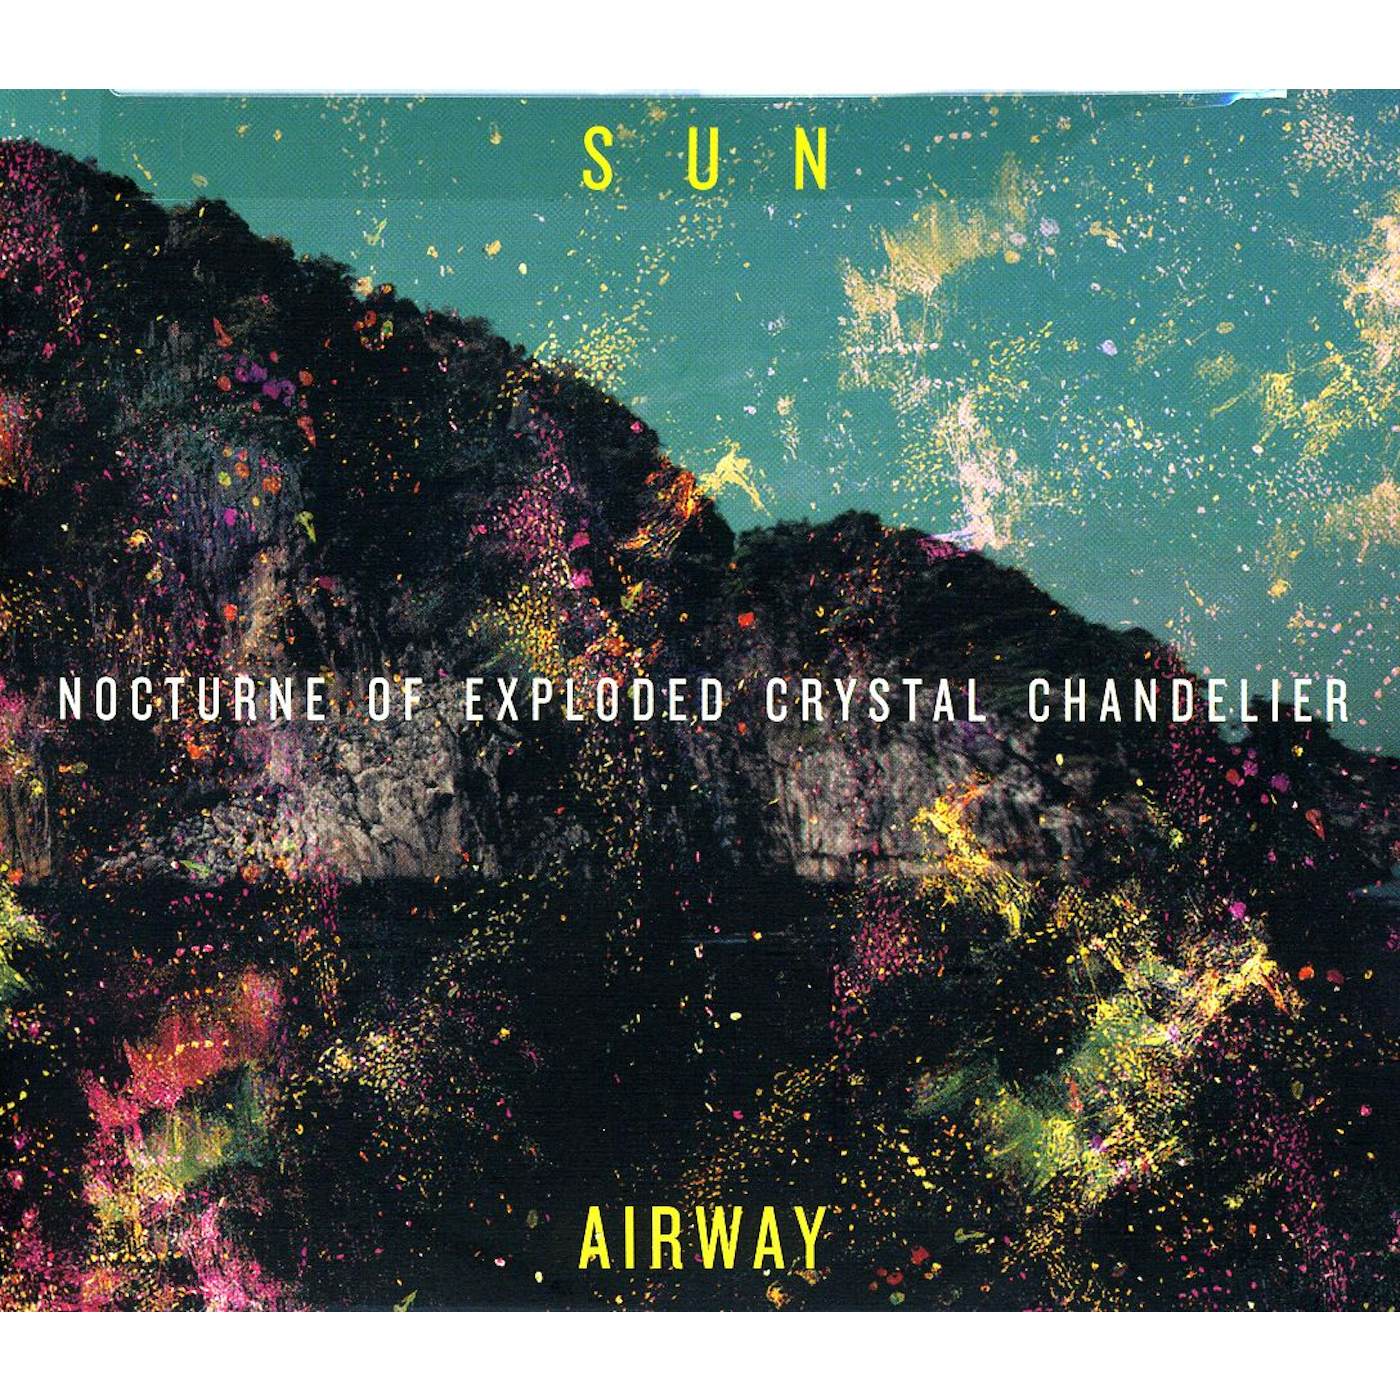 Sun Airway NOCTURNE OF EXPLODED CRYSTAL CHANDELIER CD